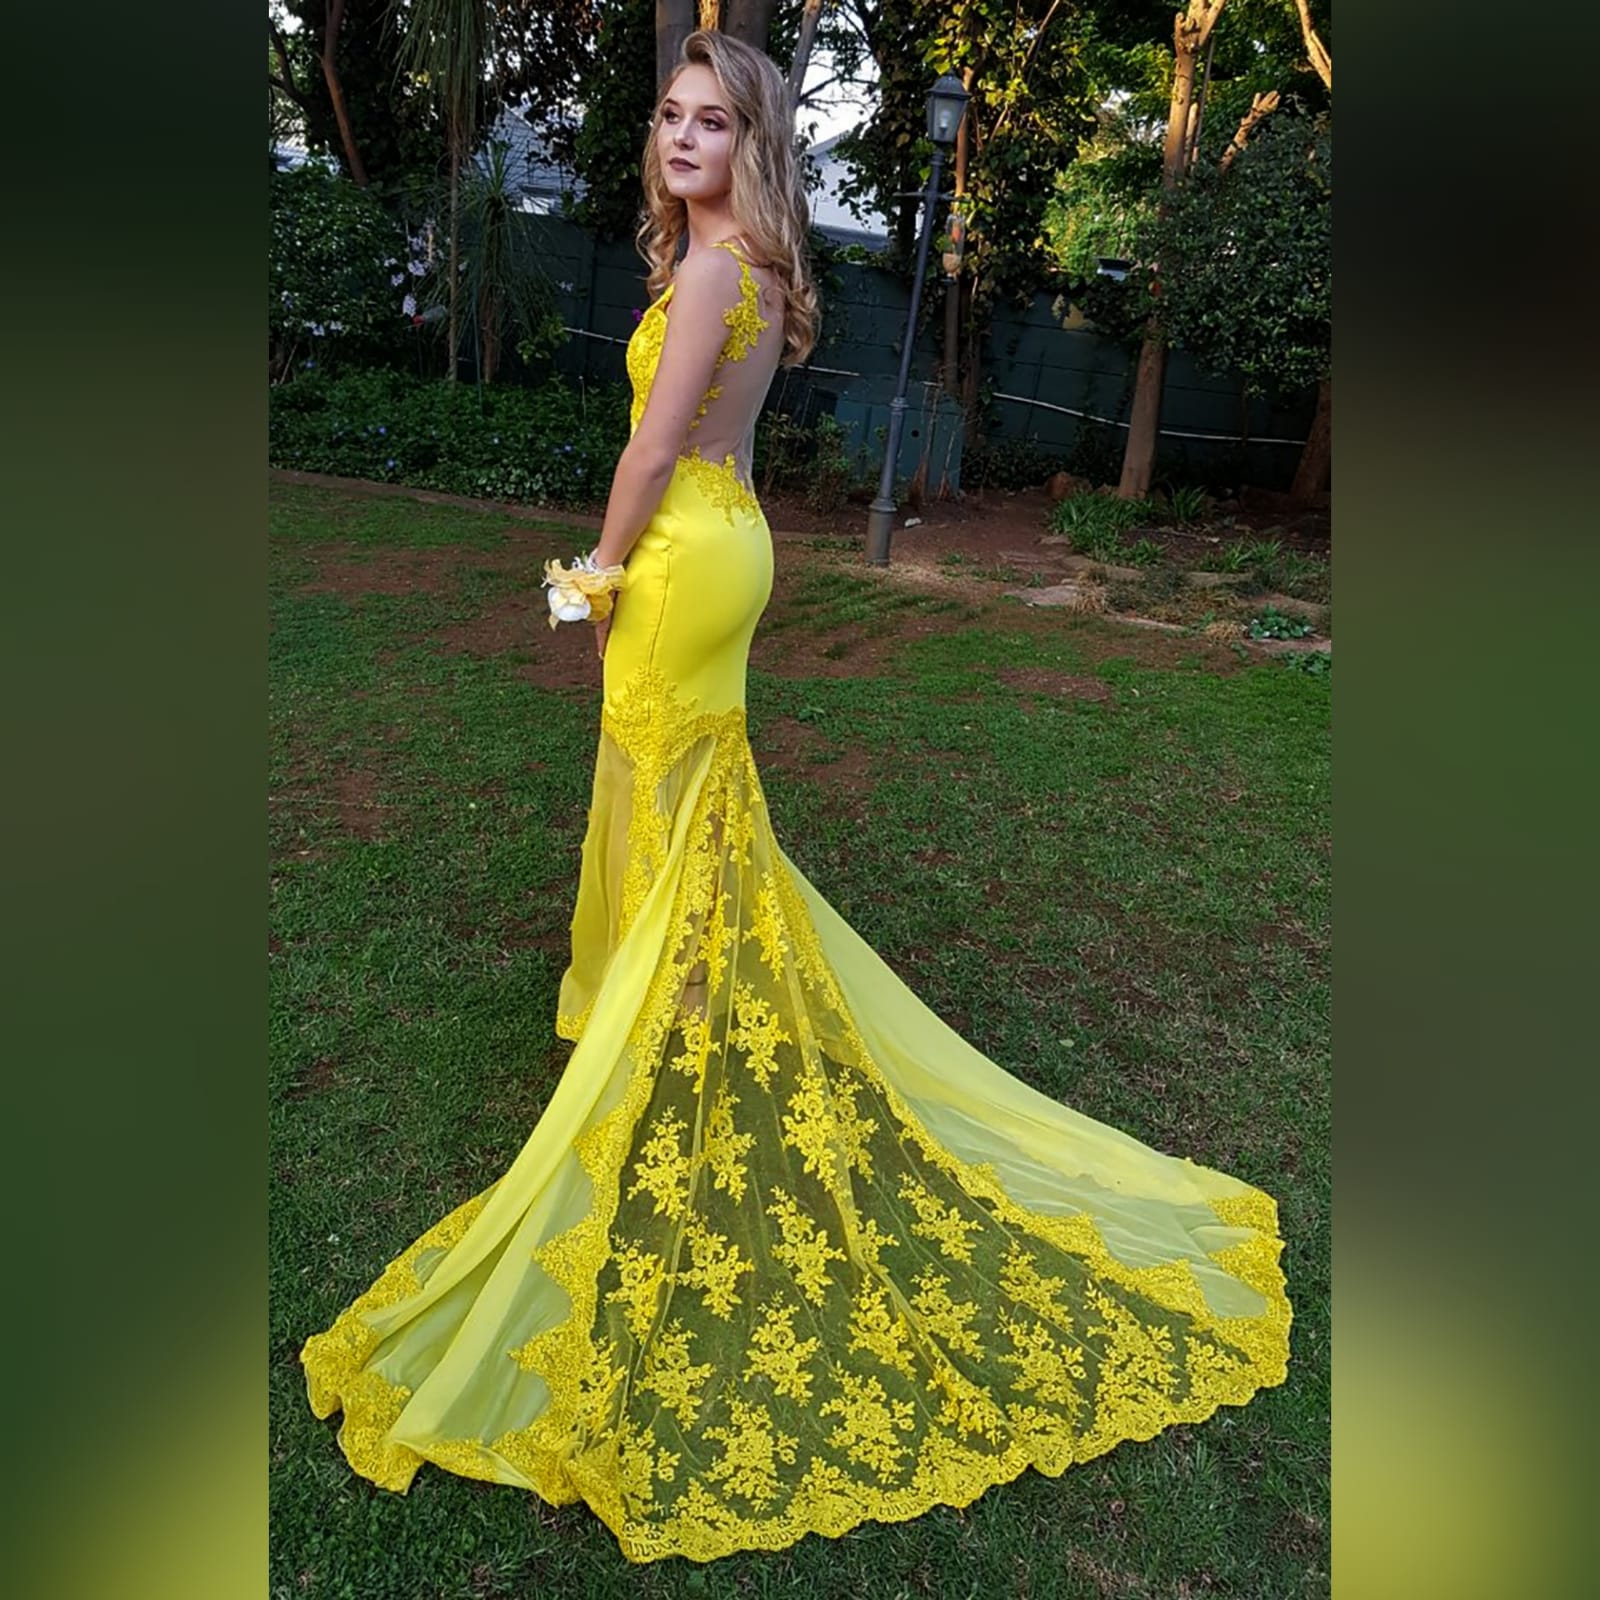 Canary yellow lace soft mermaid prom dress 1 canary yellow, lace, soft mermaid prom dance dress with sheer legs, detailed with lace. With an illusion open back.